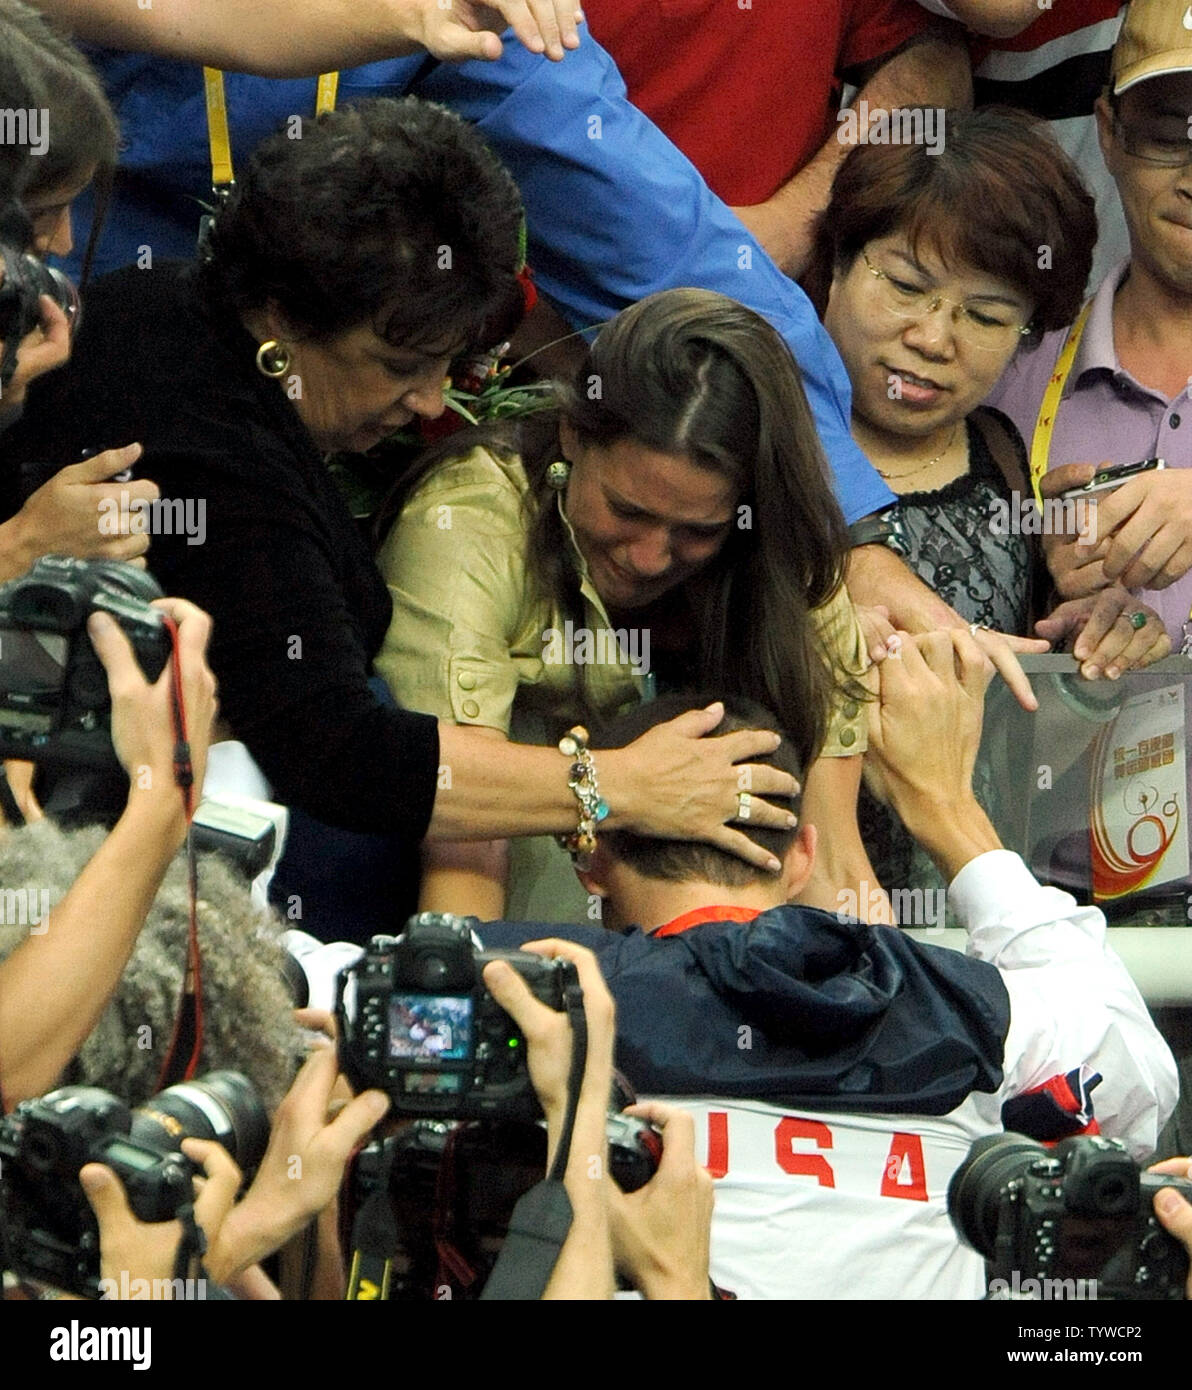 USA's Michael Phelps is congratulated by his mother, sister and others in the stands after the US team received their medals for the Men's 4x100M Medley, setting a world record of 3:29.34, at the National Aquatic Center (Water Cube) during the 2008 Summer Olympics in Beijing, China, on August 17, 2008.  Phelps set the world record for medals in a single Olympics with 8, passing Mark Spitz.    (UPI Photo/Roger L. Wollenberg) Stock Photo